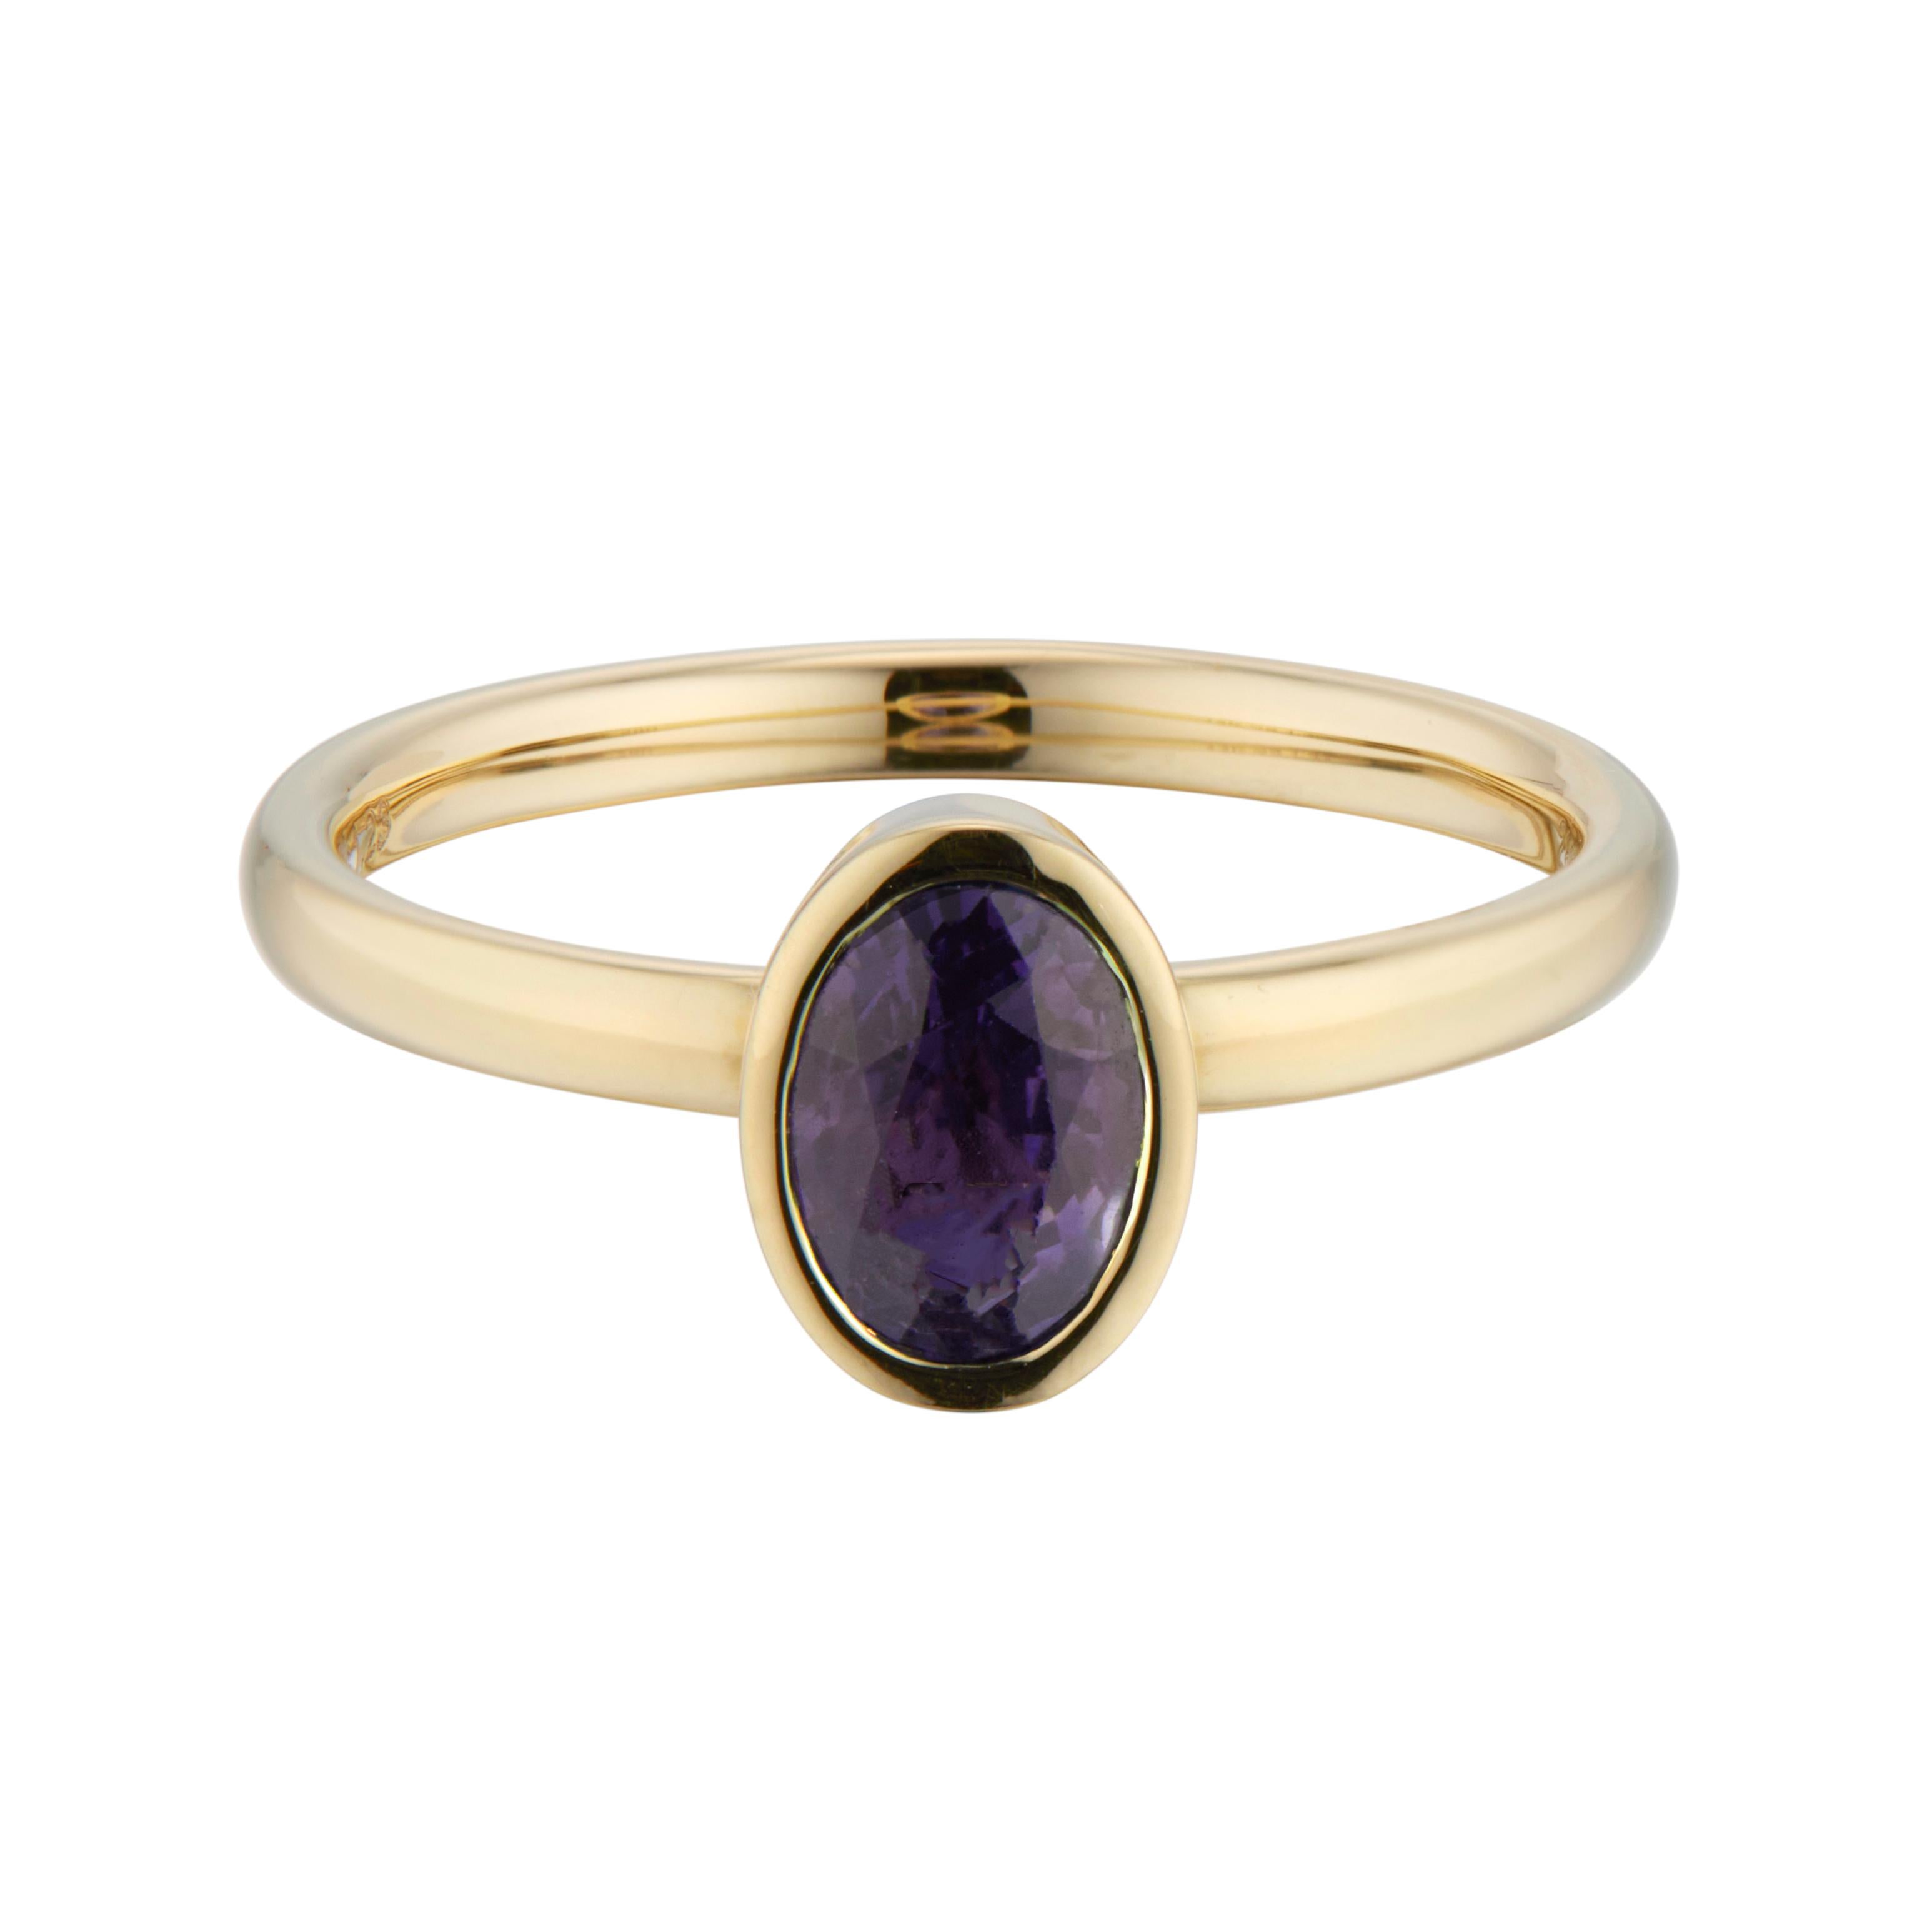 Sapphire engagement ring. Oval sapphire bezel set center stone in a 14k yellow gold setting. 

1 oval purple sapphire, approx. 1.25cts
Size 7 and sizable
14k yellow gold 
Stamped: 14k
2.9 grams
Width at top: 8.4mm
Height at top: 5.4mm
Width at